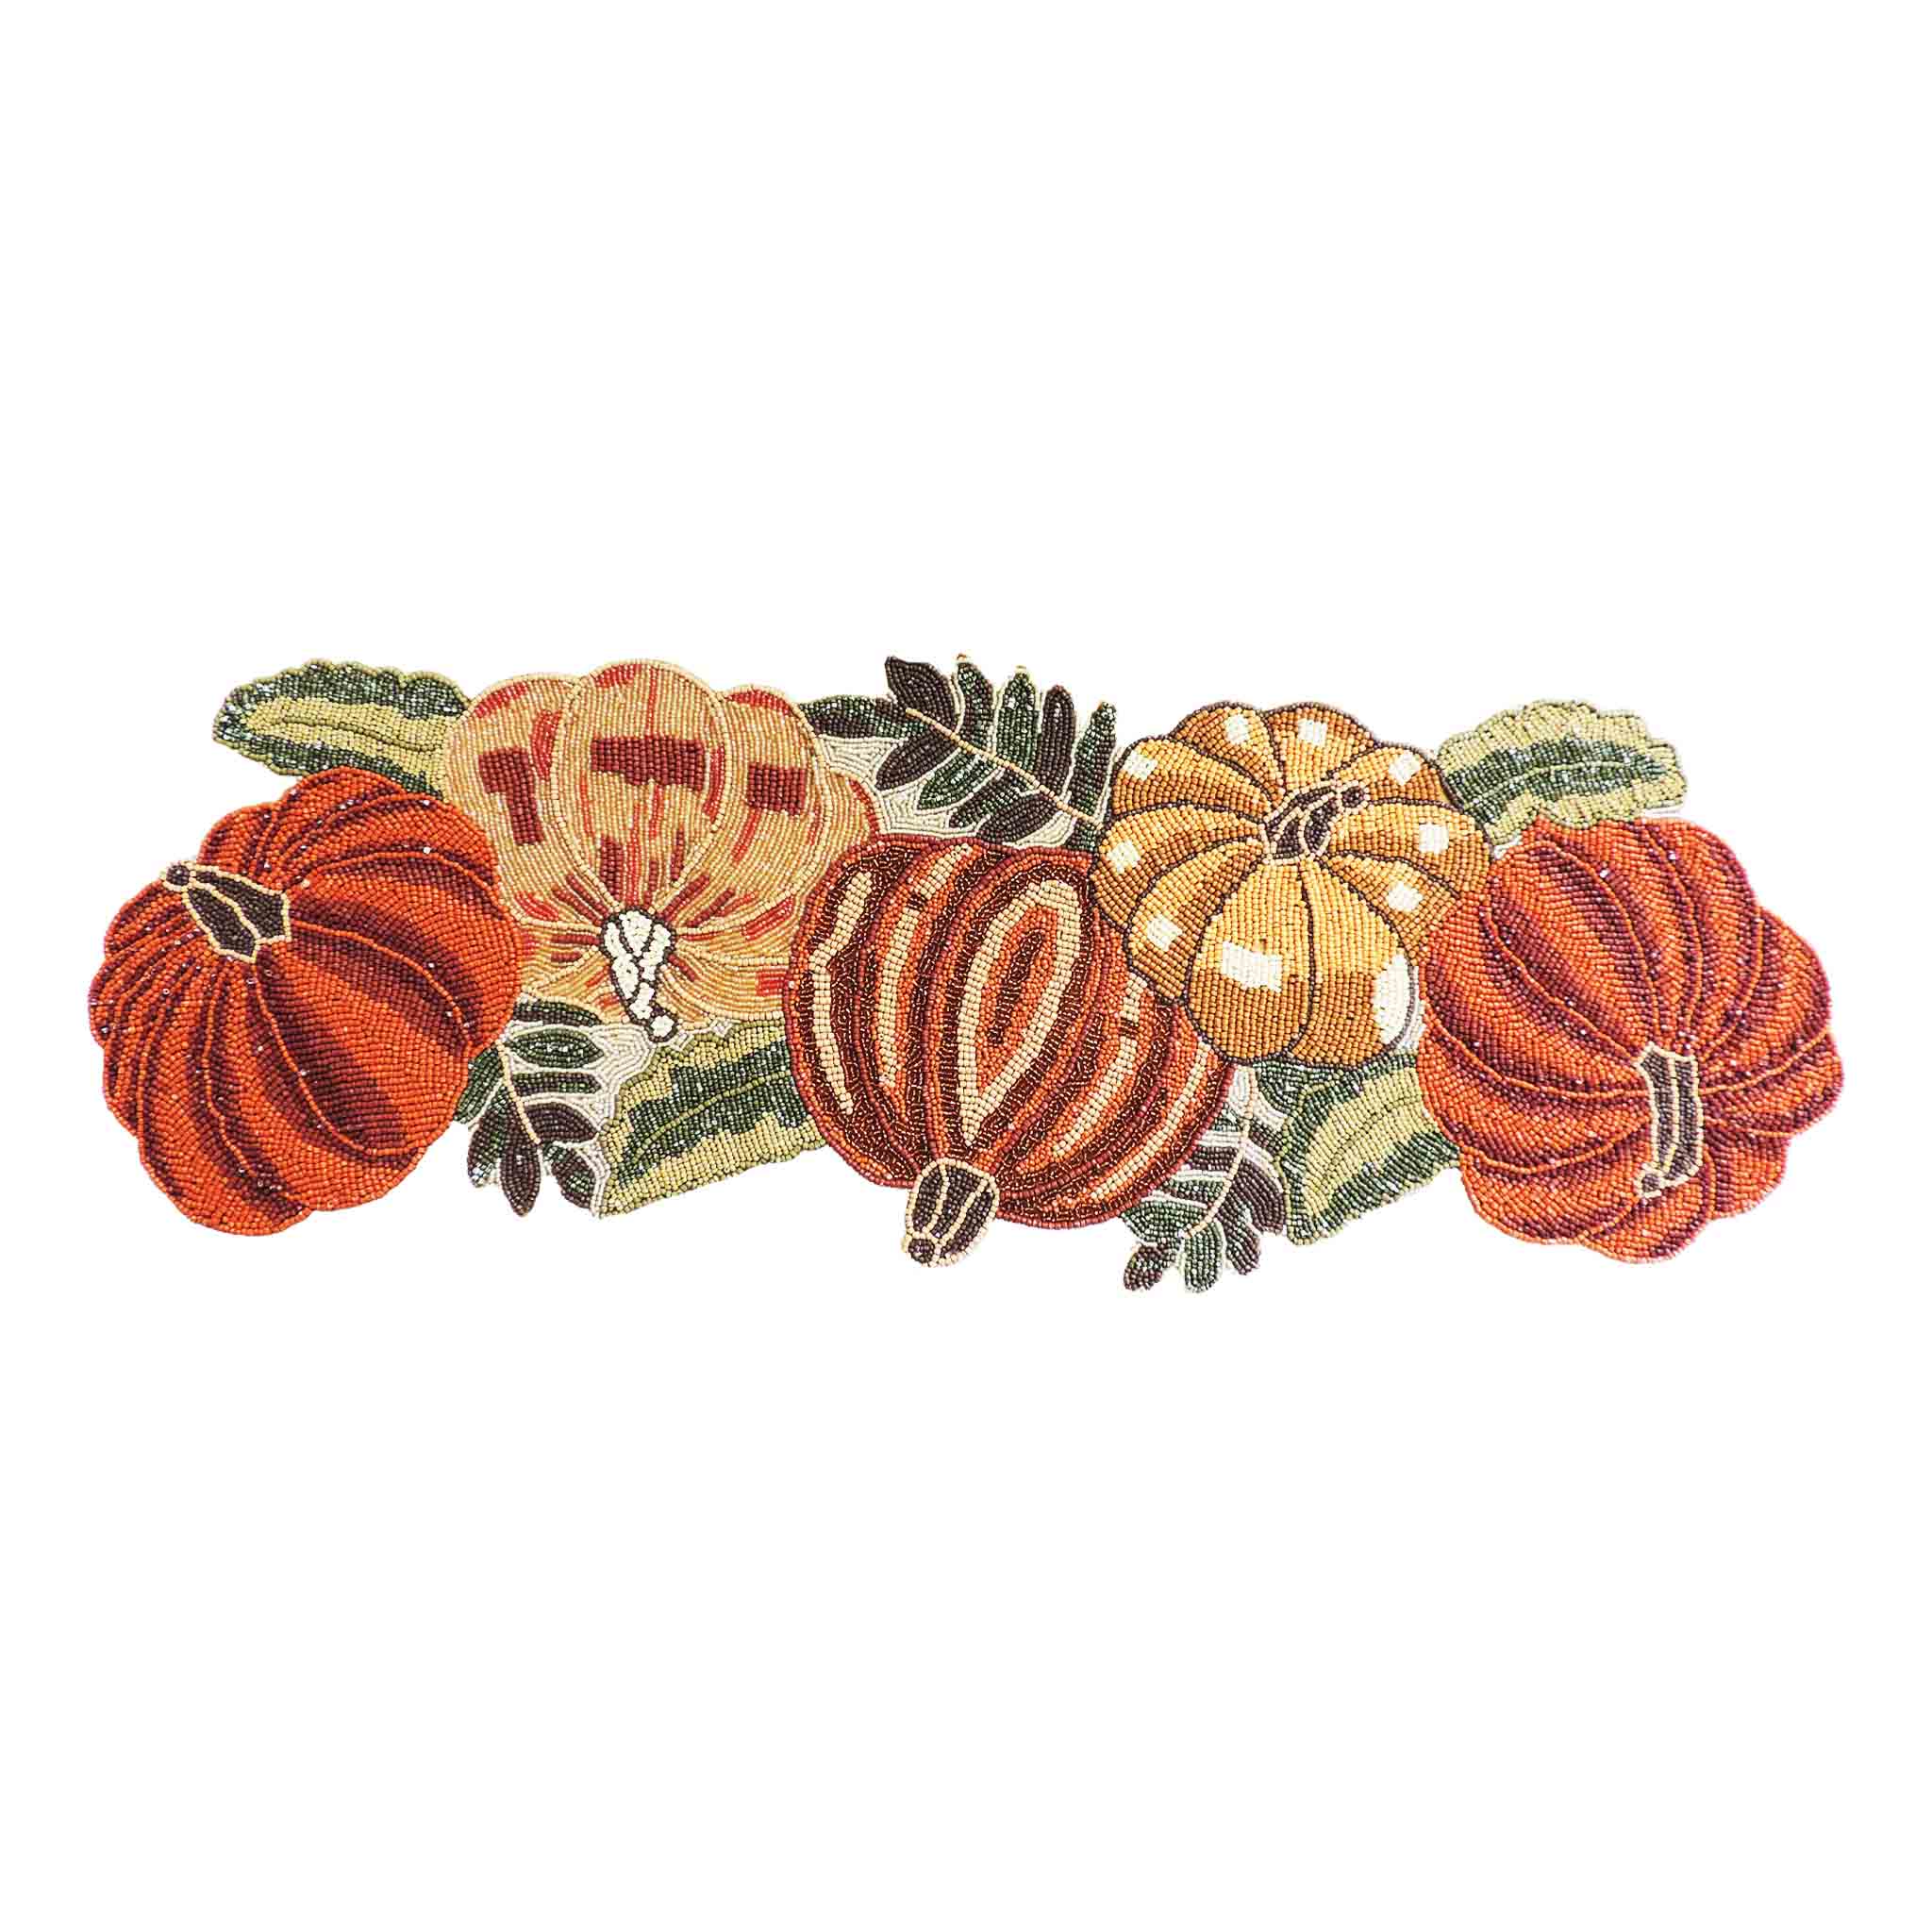 Daisy Gourd Glass Bead Embroidered Table Runner<br>Size: 36" x 13"<br>Color: Orange Gold Green